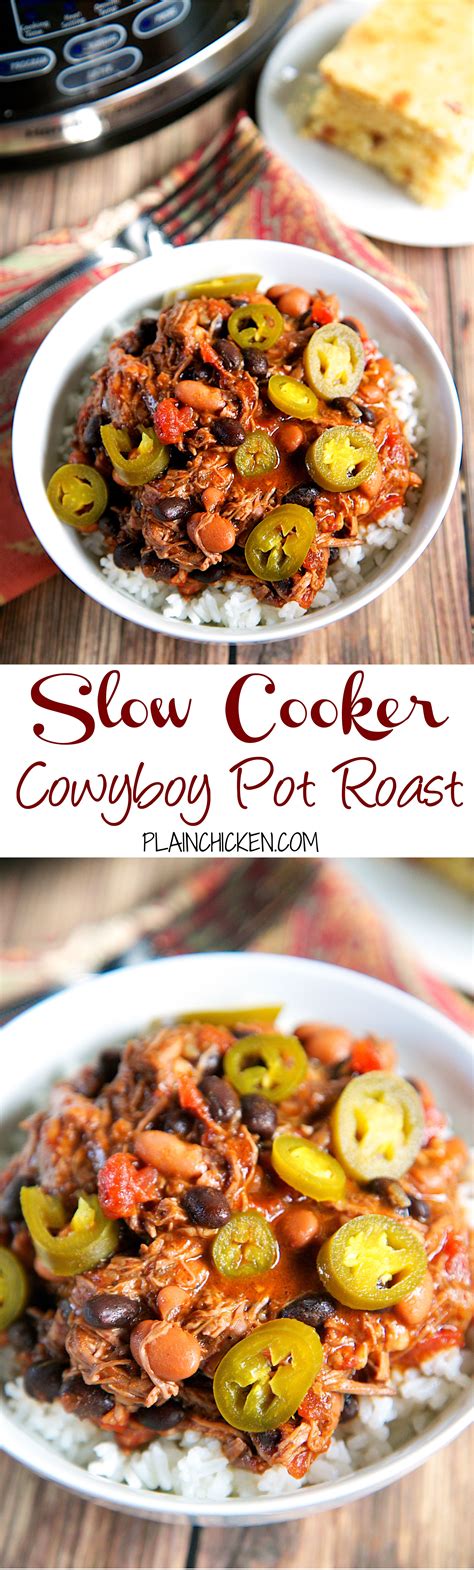 If you like your pinto beans whole, you're done! {Slow Cooker} Cowboy Pot Roast recipe - pot roast slow cooked with pinto beans, Rotel tomatoes ...